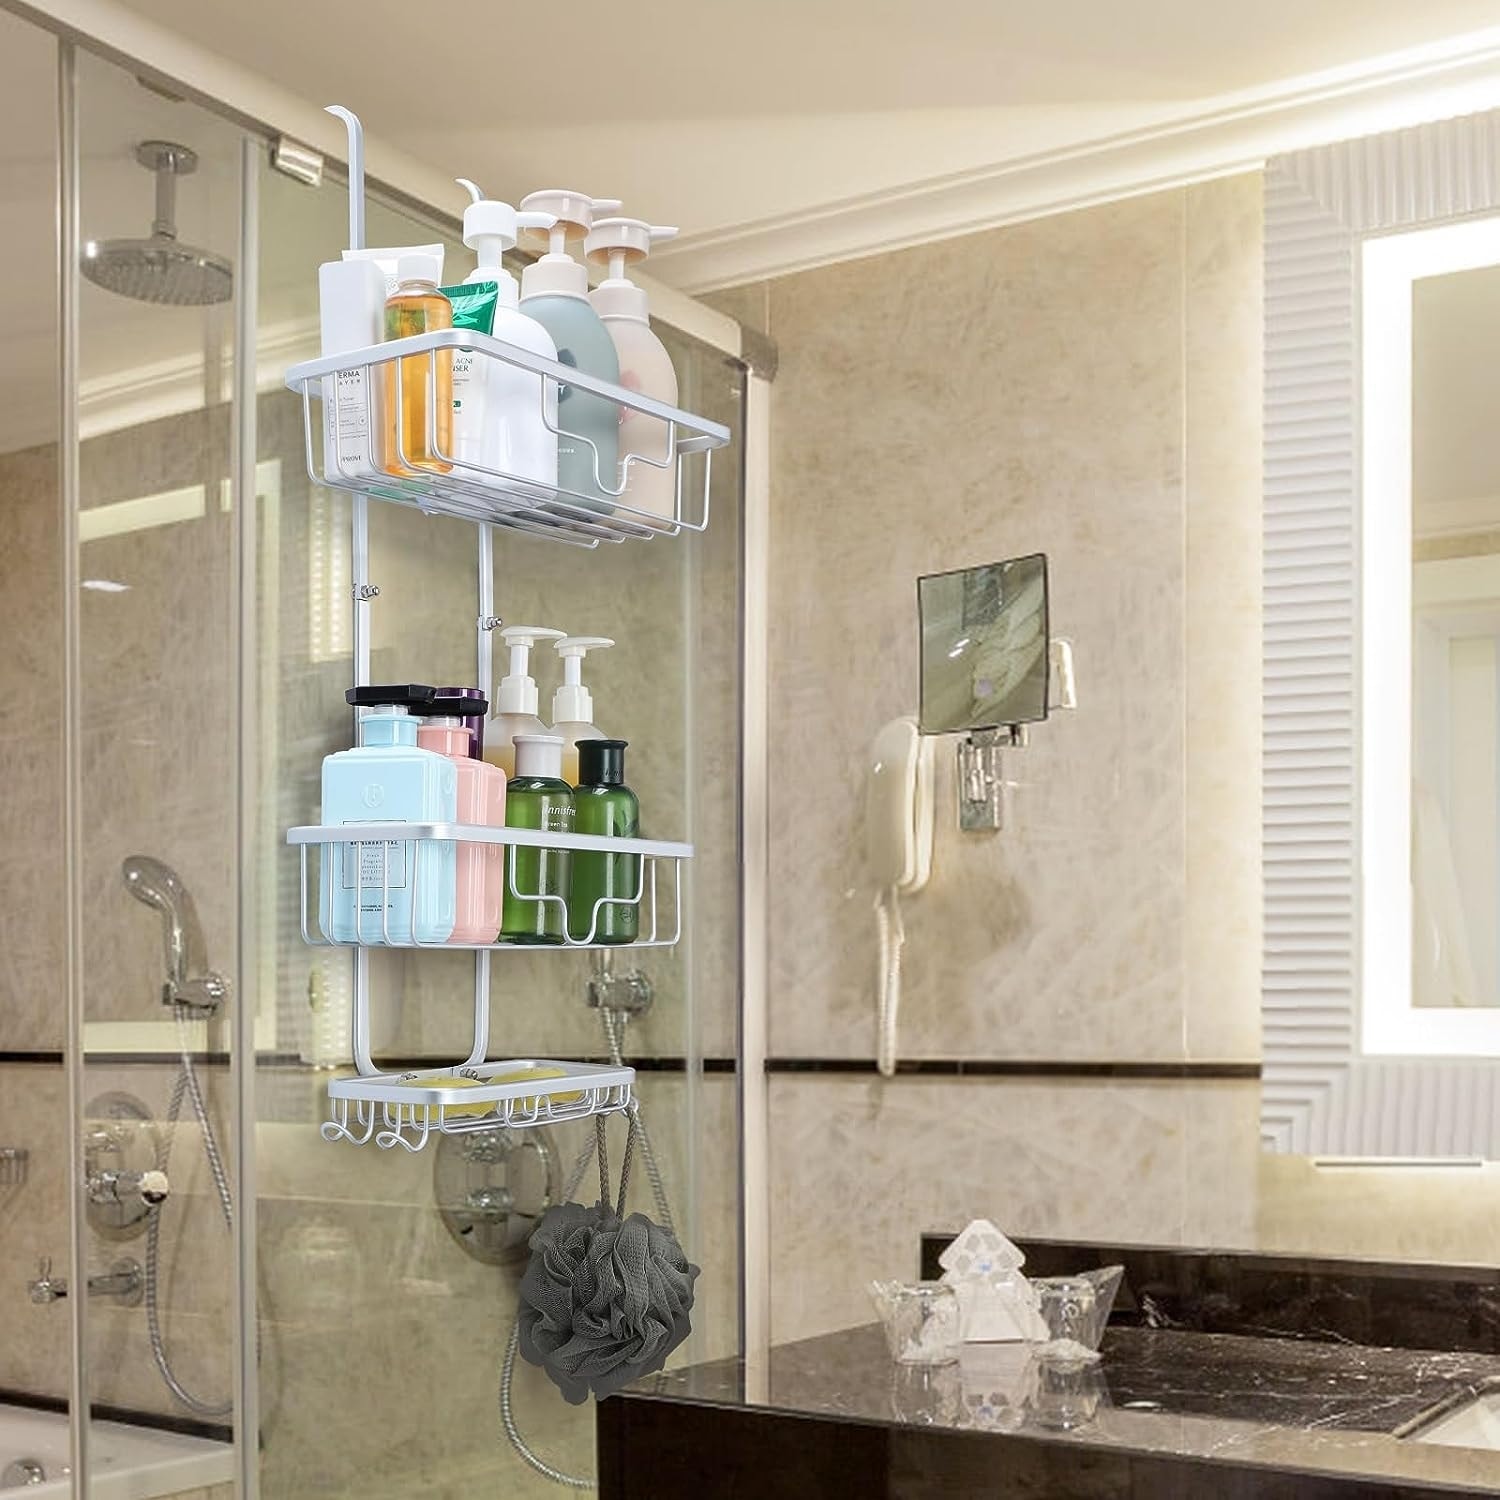 https://ak1.ostkcdn.com/images/products/is/images/direct/c37edb30a9bd244a05c734f9ca52d6be47c32f76/3-Tier-Shower-Racks-with-Hooks-and-Shampoo-Soap-Razor-Holder.jpg